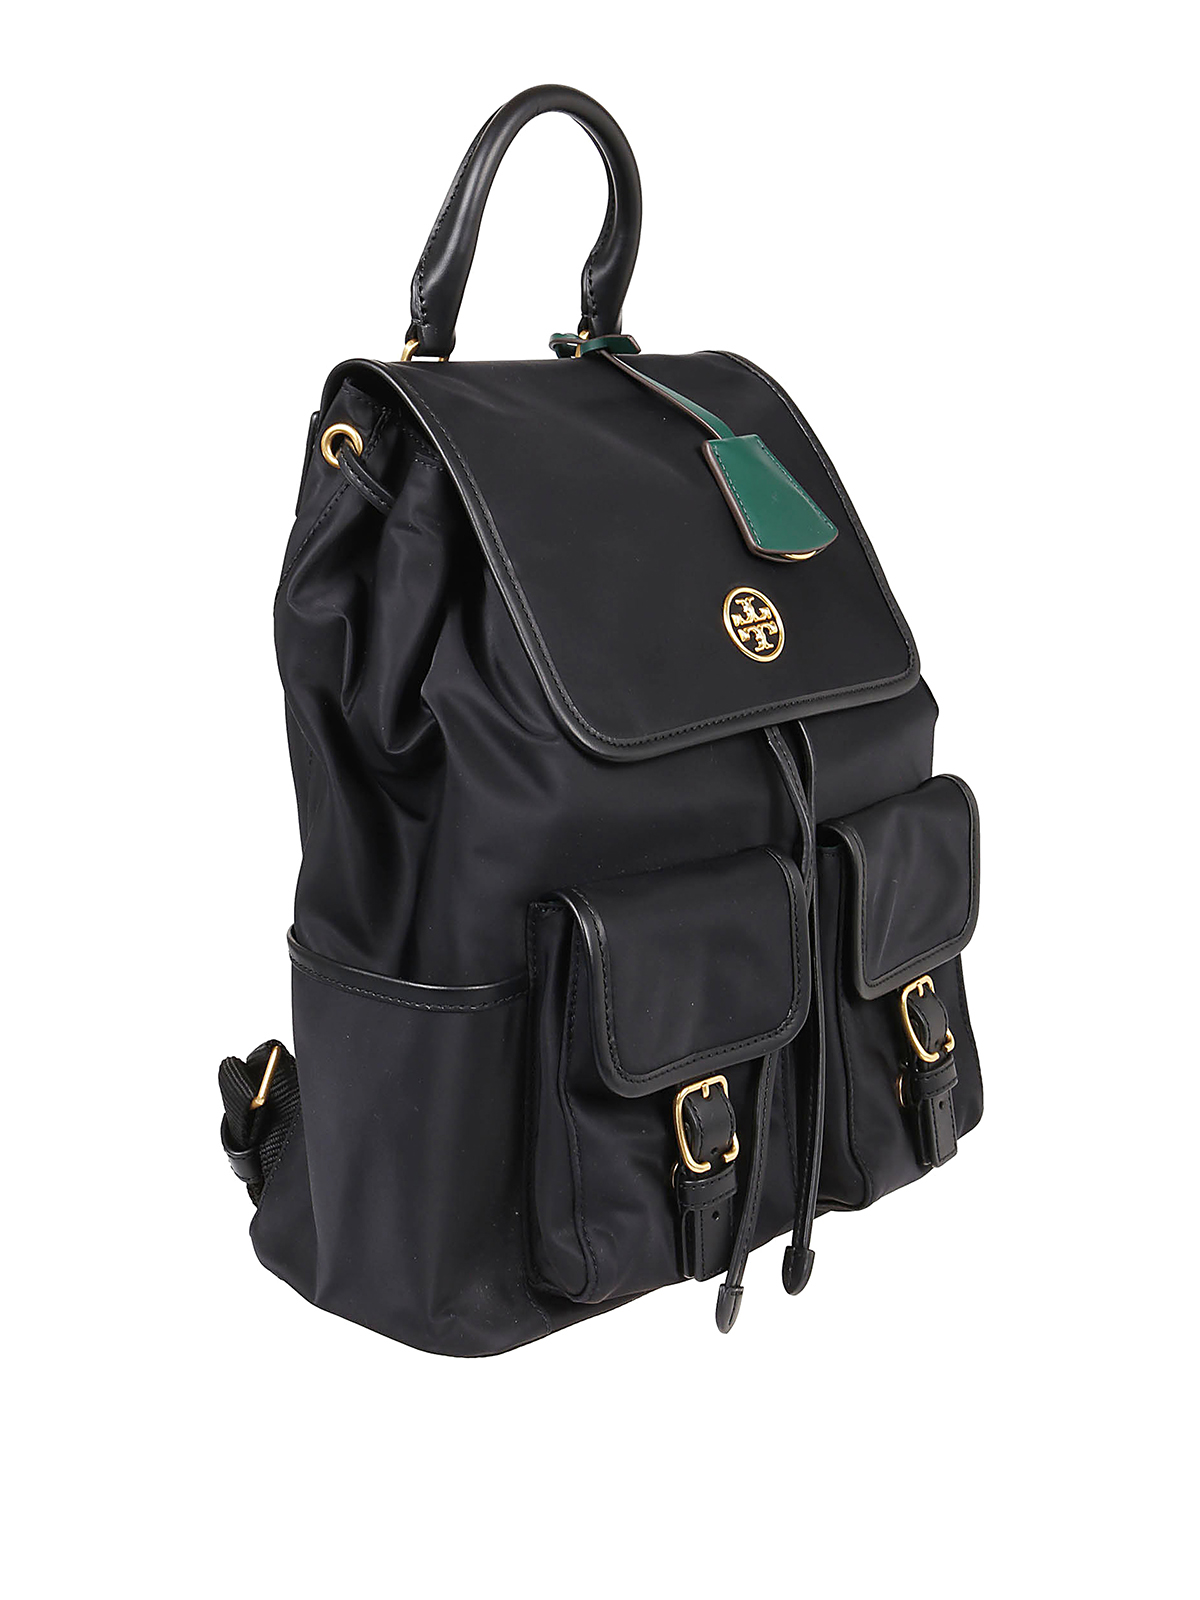 Tory Burch - Black Leather Backpack